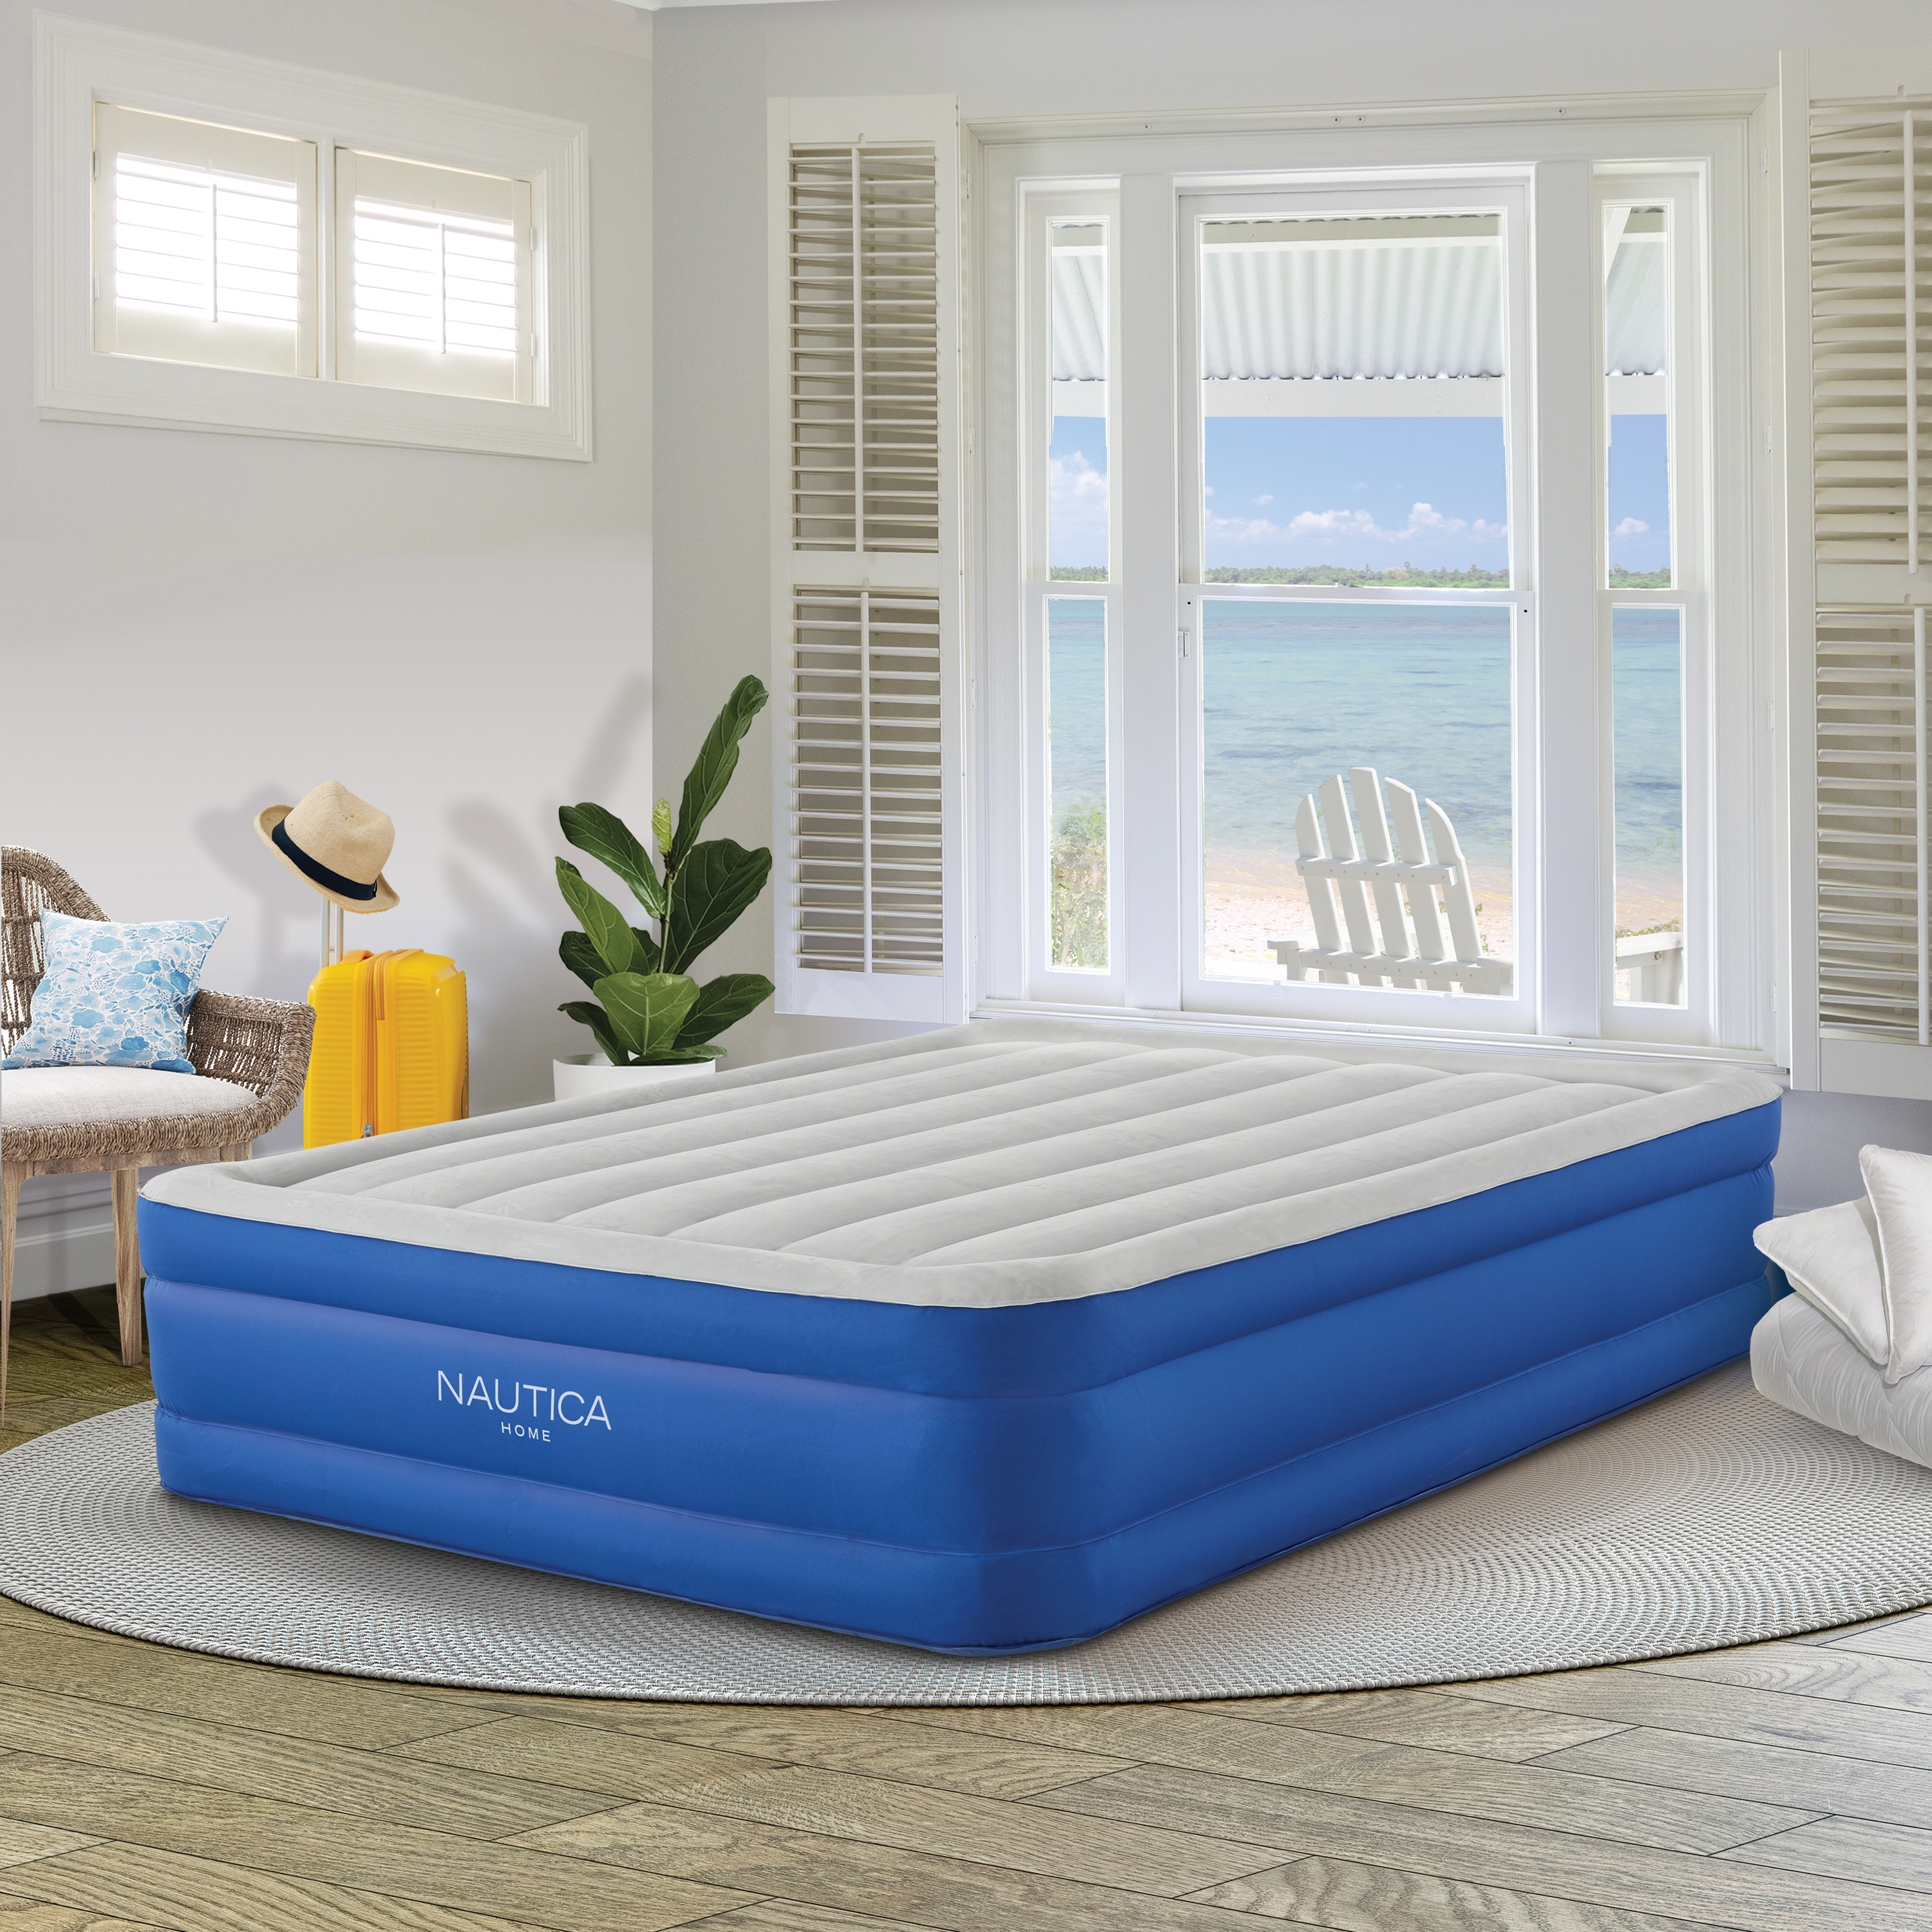 https://ak1.ostkcdn.com/images/products/is/images/direct/6db516cac4e26ae3d8261446f86ab506b0cde7e8/Nautica-Home-Plush-Aire-Inflatable-Air-Mattress.jpg